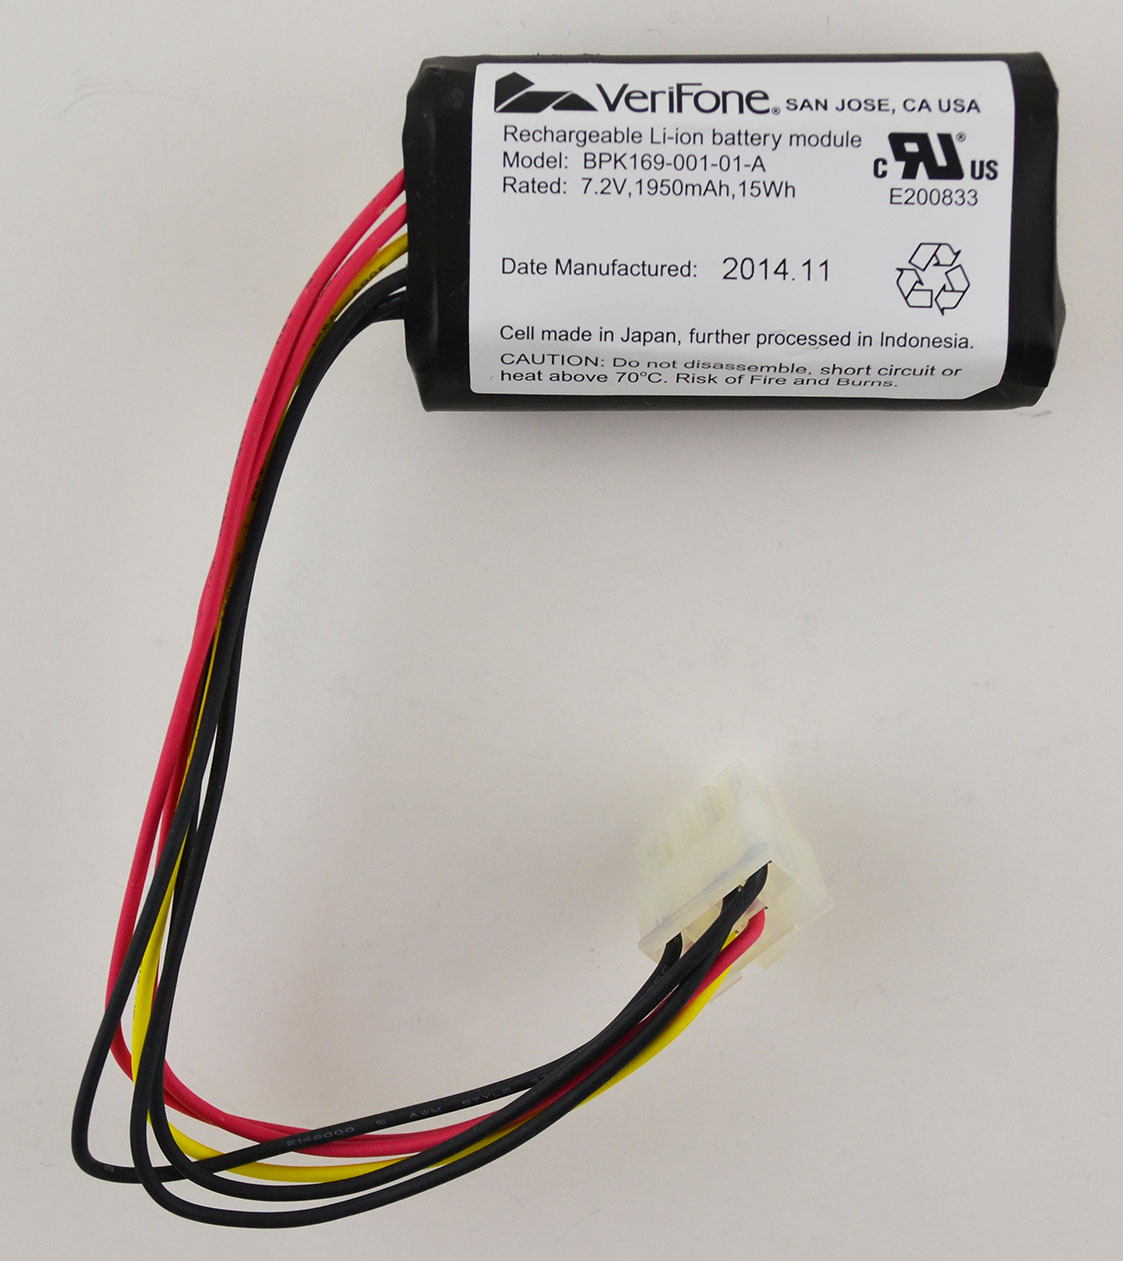 BATTERY PACK FOR RUBY2 AND RUBY CI, Fits Verifone Image